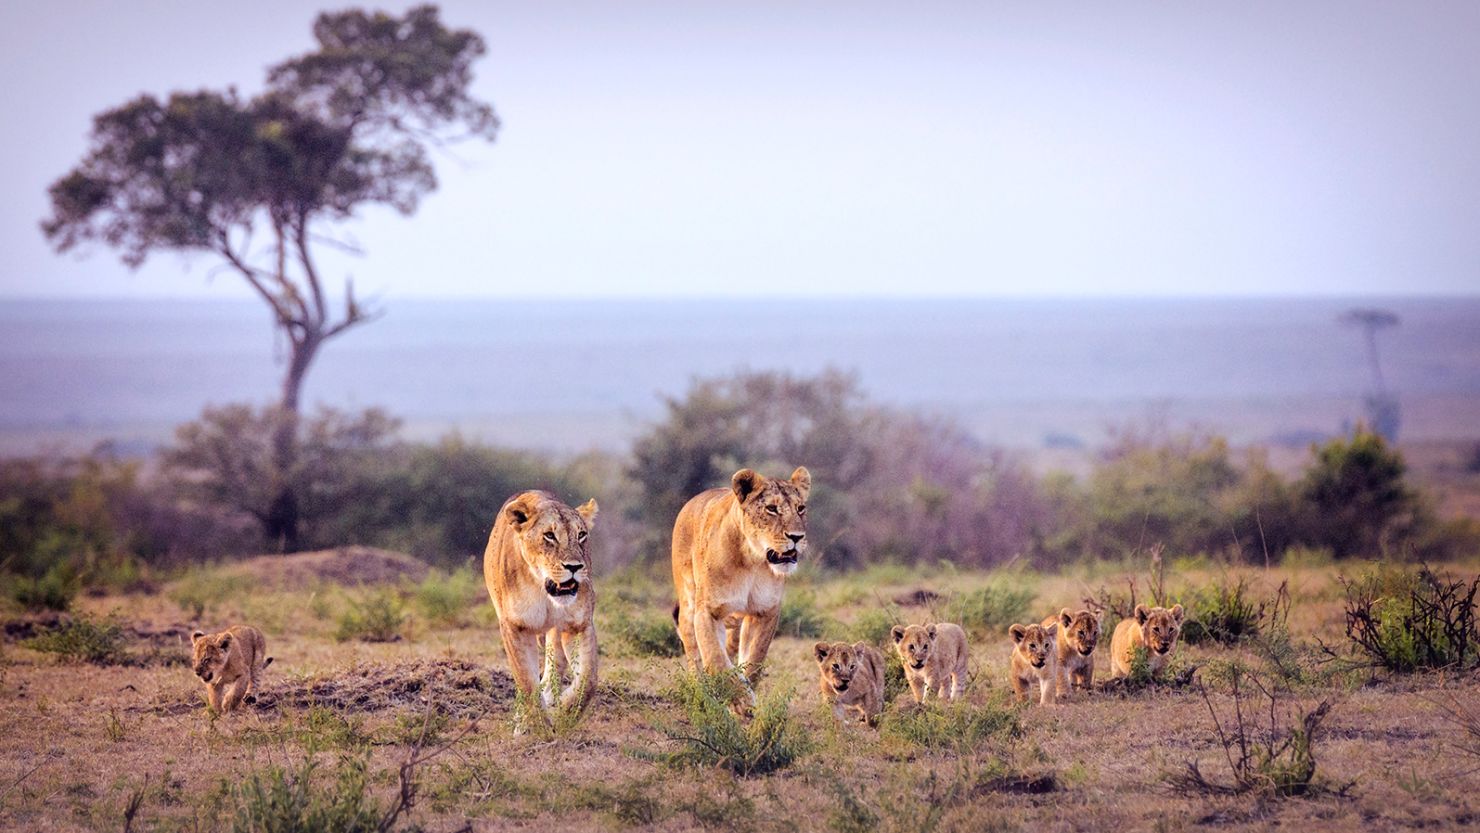 Lionesses with cubs, part of the New Rongai Pride, walk together near sunset at the Masai Mara, Kenya in July.